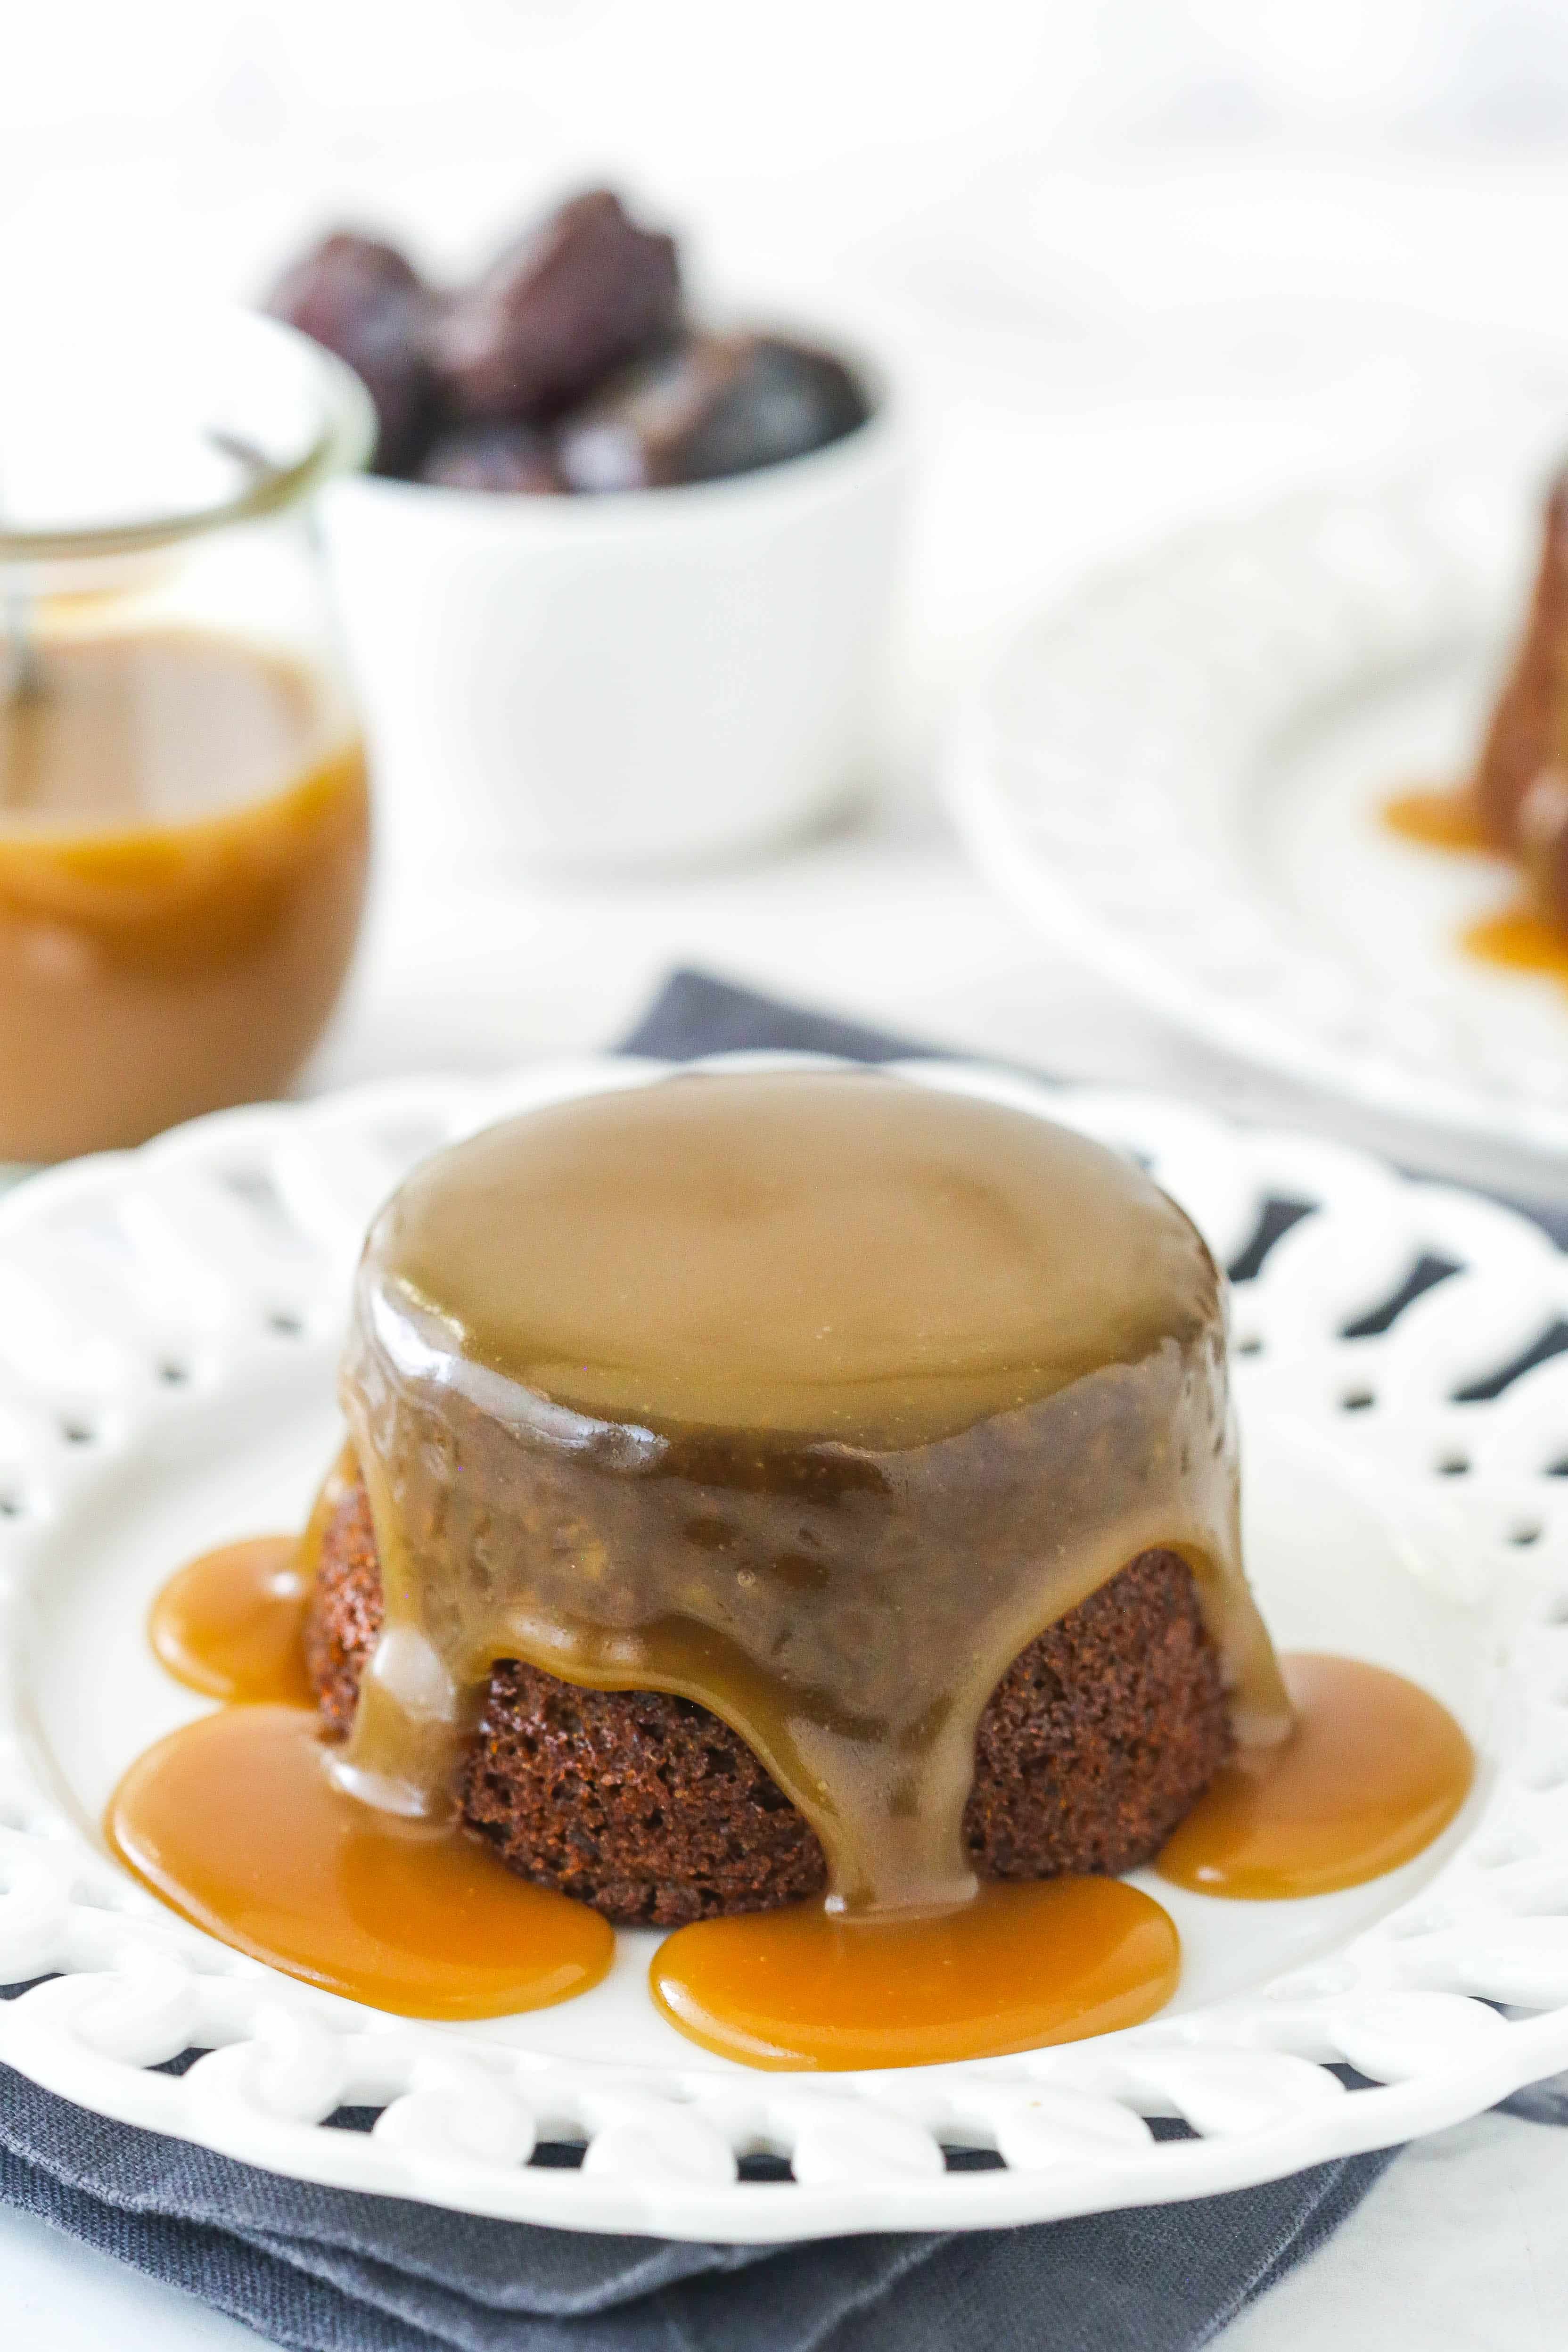 Sticky toffee pudding on a white serving plate